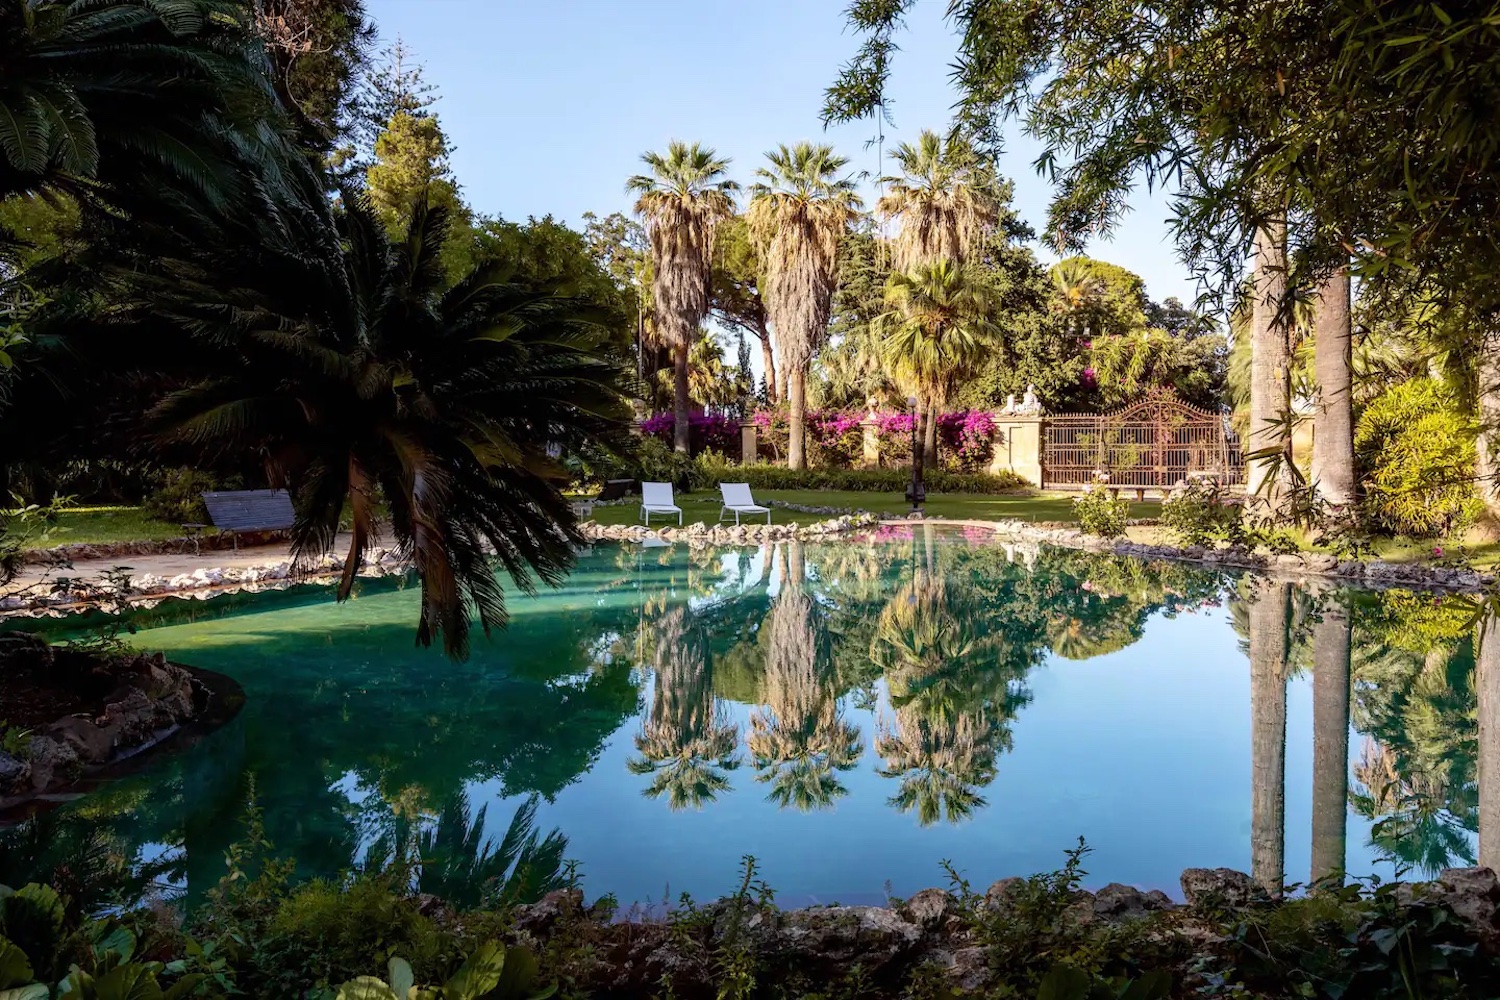 The pool surrounded by trees at Villa Tasca in Sicily, the house Harper and Daphne visit in "The White Lotus"